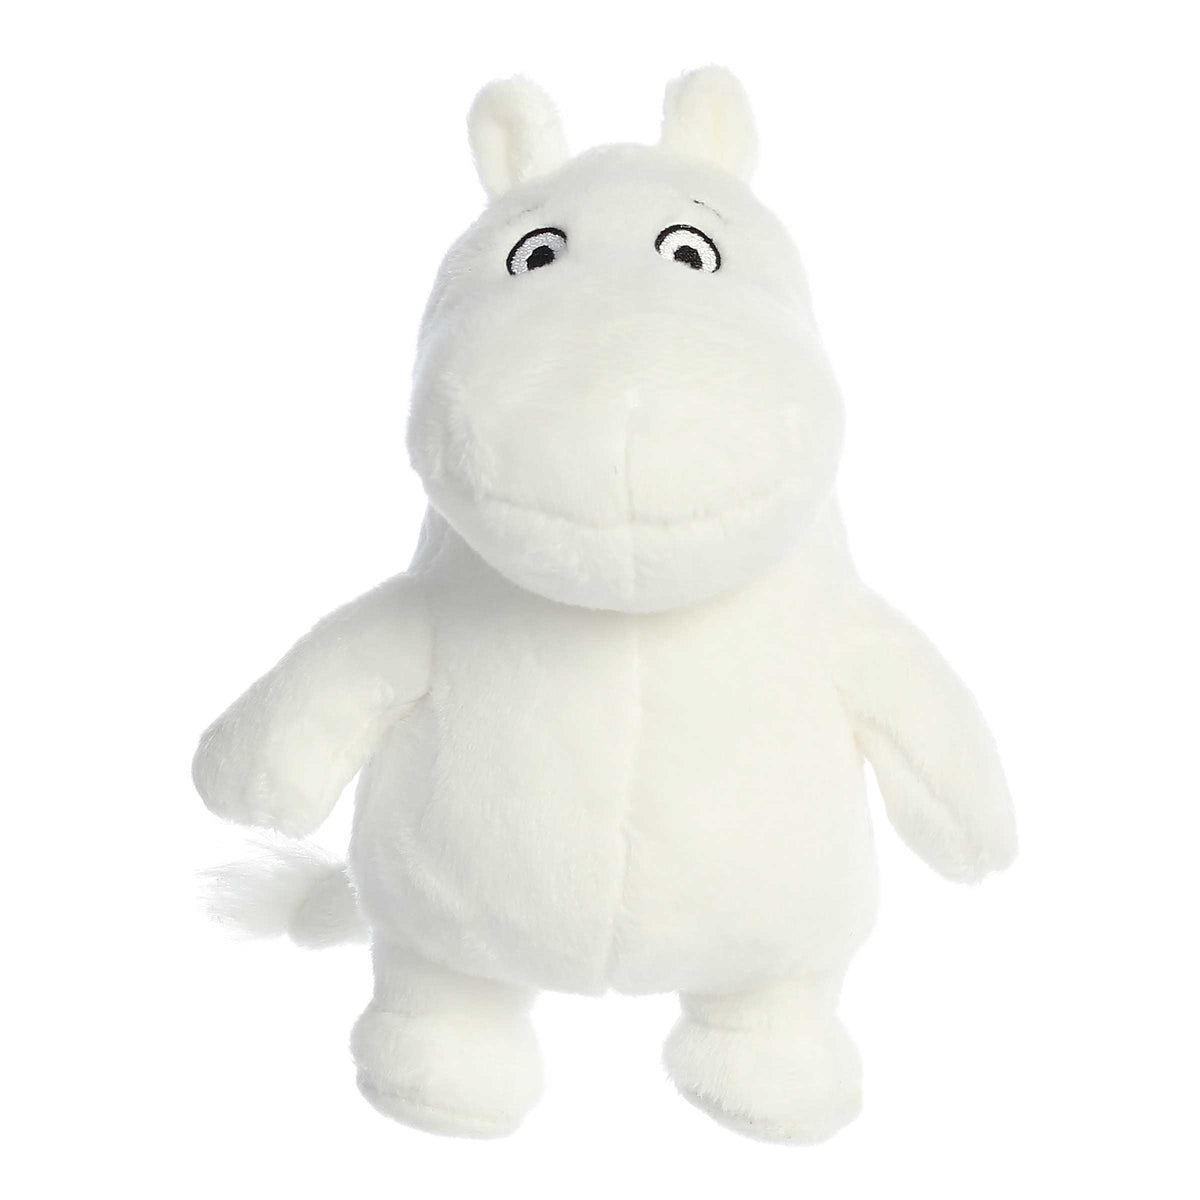 A Soft white Moomin plush standing up, with the iconic plump body and expressive eyes, ready for cozy snuggles